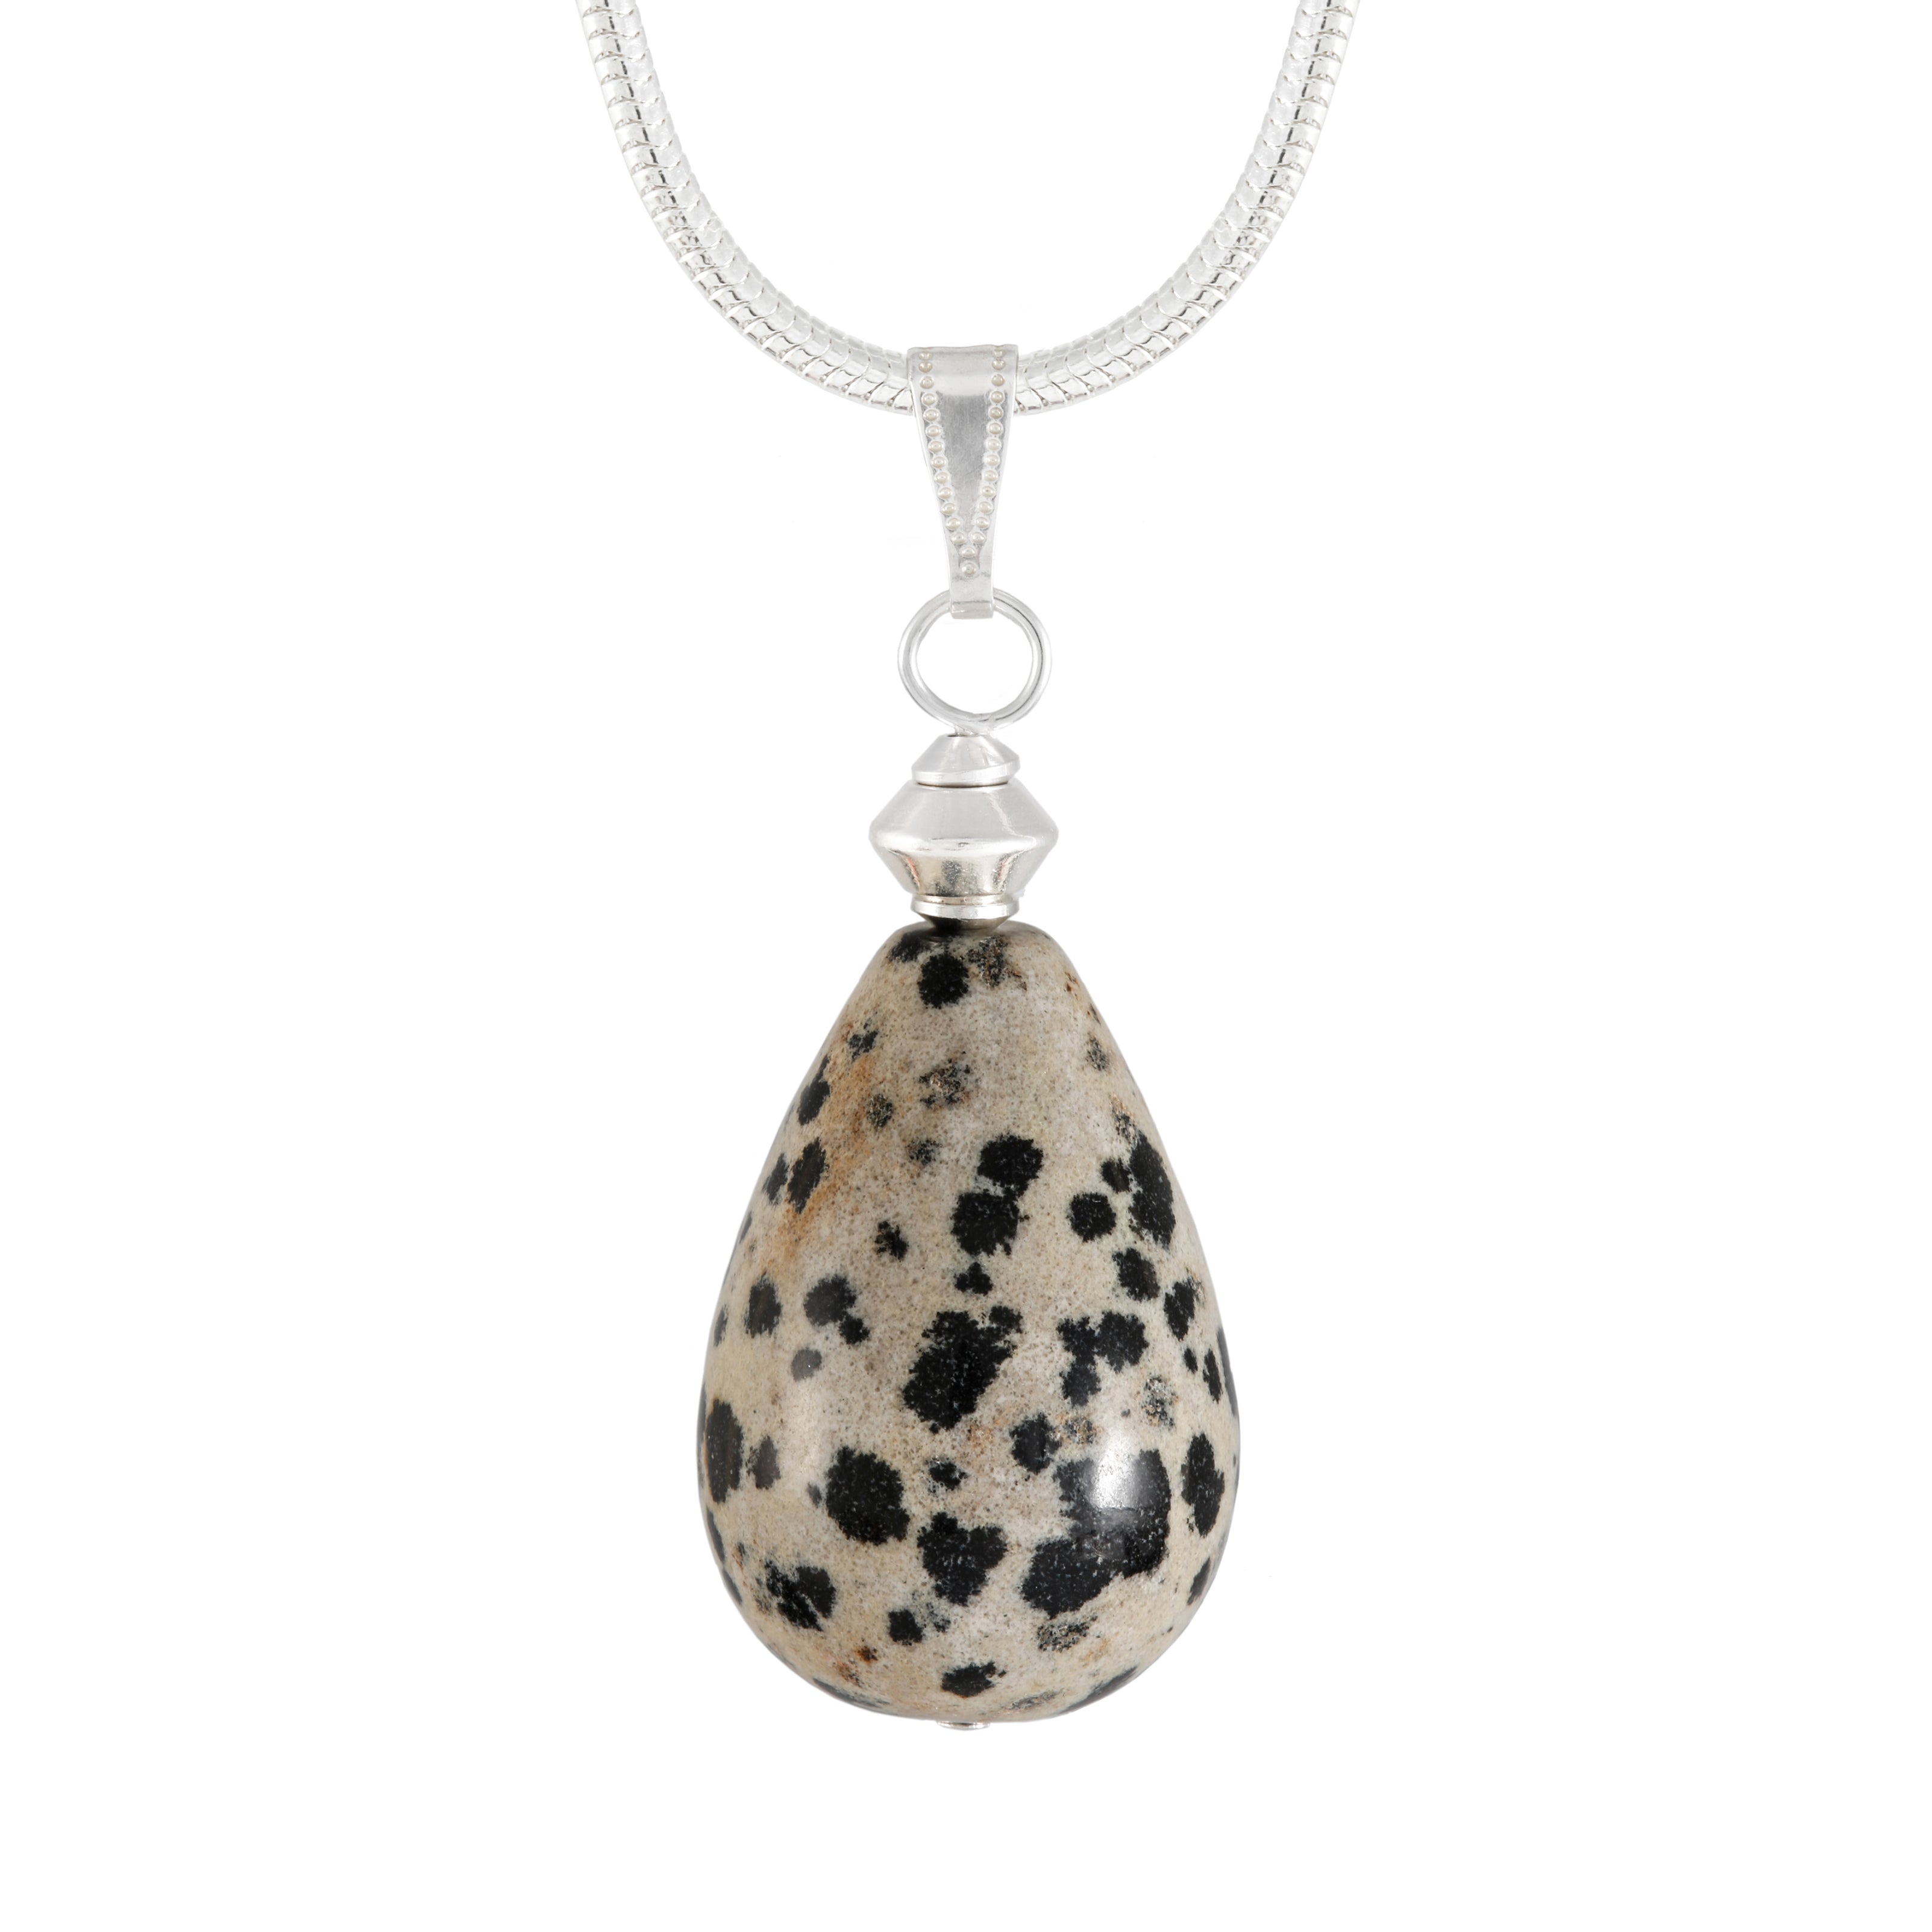 Dalmation Jasper Large Teardrop Necklace with silver plated snake chain